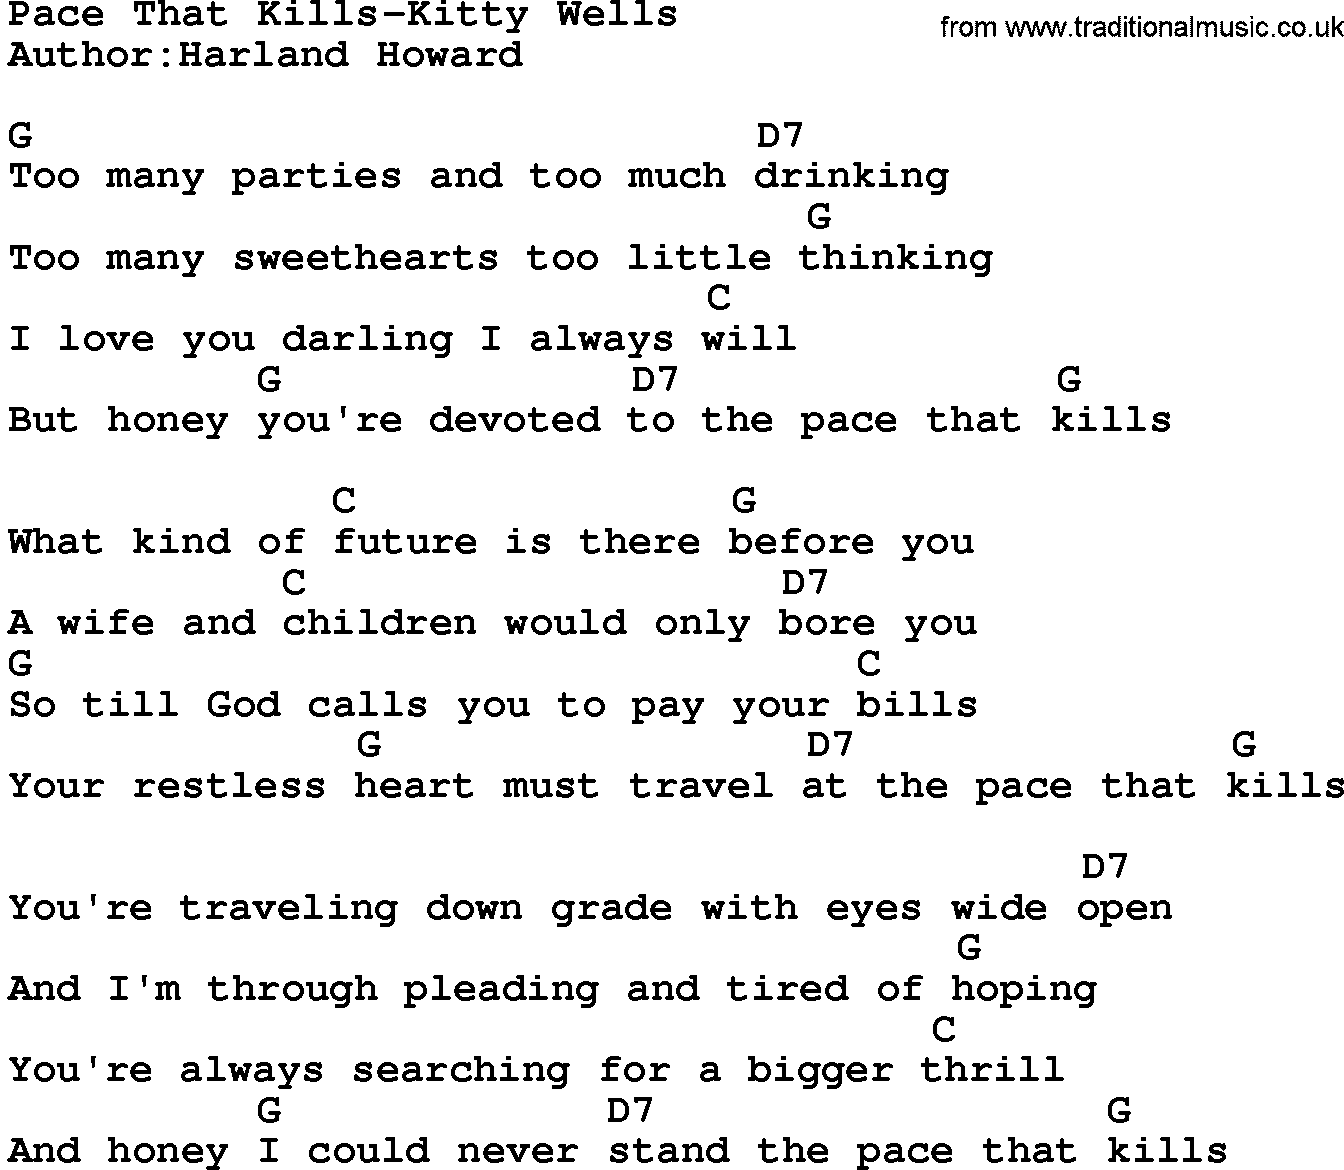 Country music song: Pace That Kills-Kitty Wells lyrics and chords